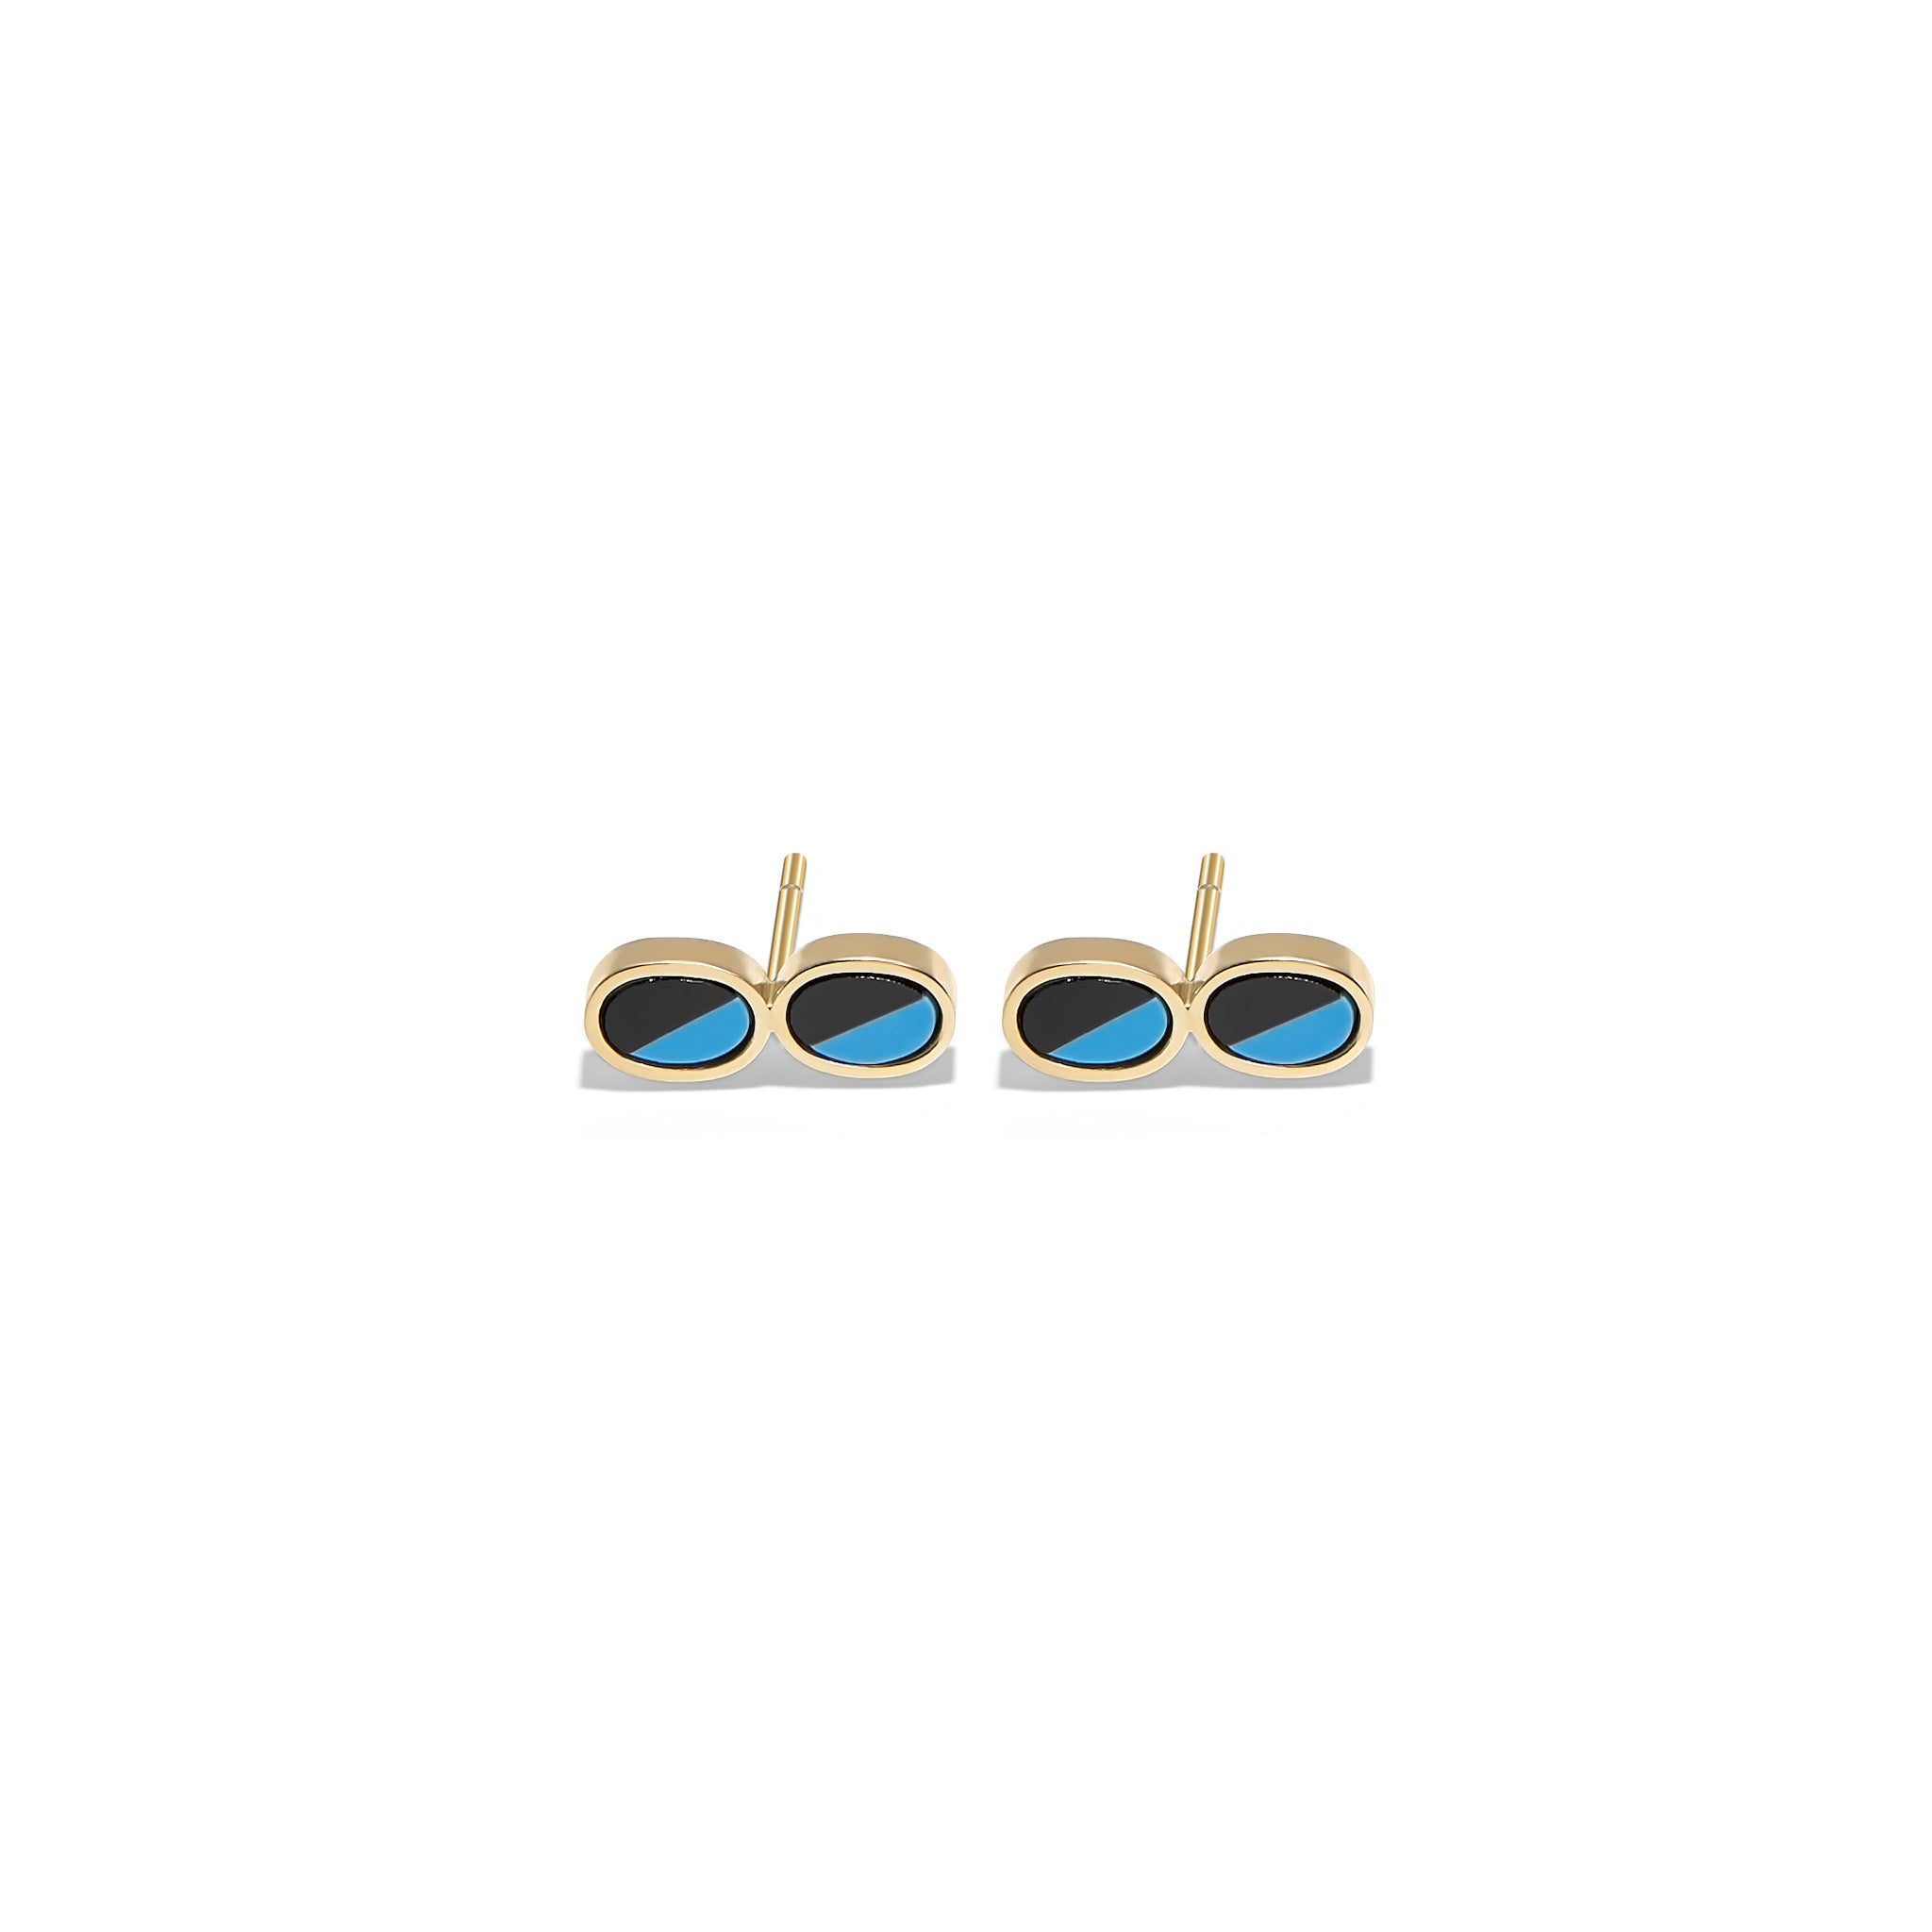 Explore our exquisite Astronomical Horizon Earrings crafted with Gold 800 and adorned with Onyx and Turquoise inlay.